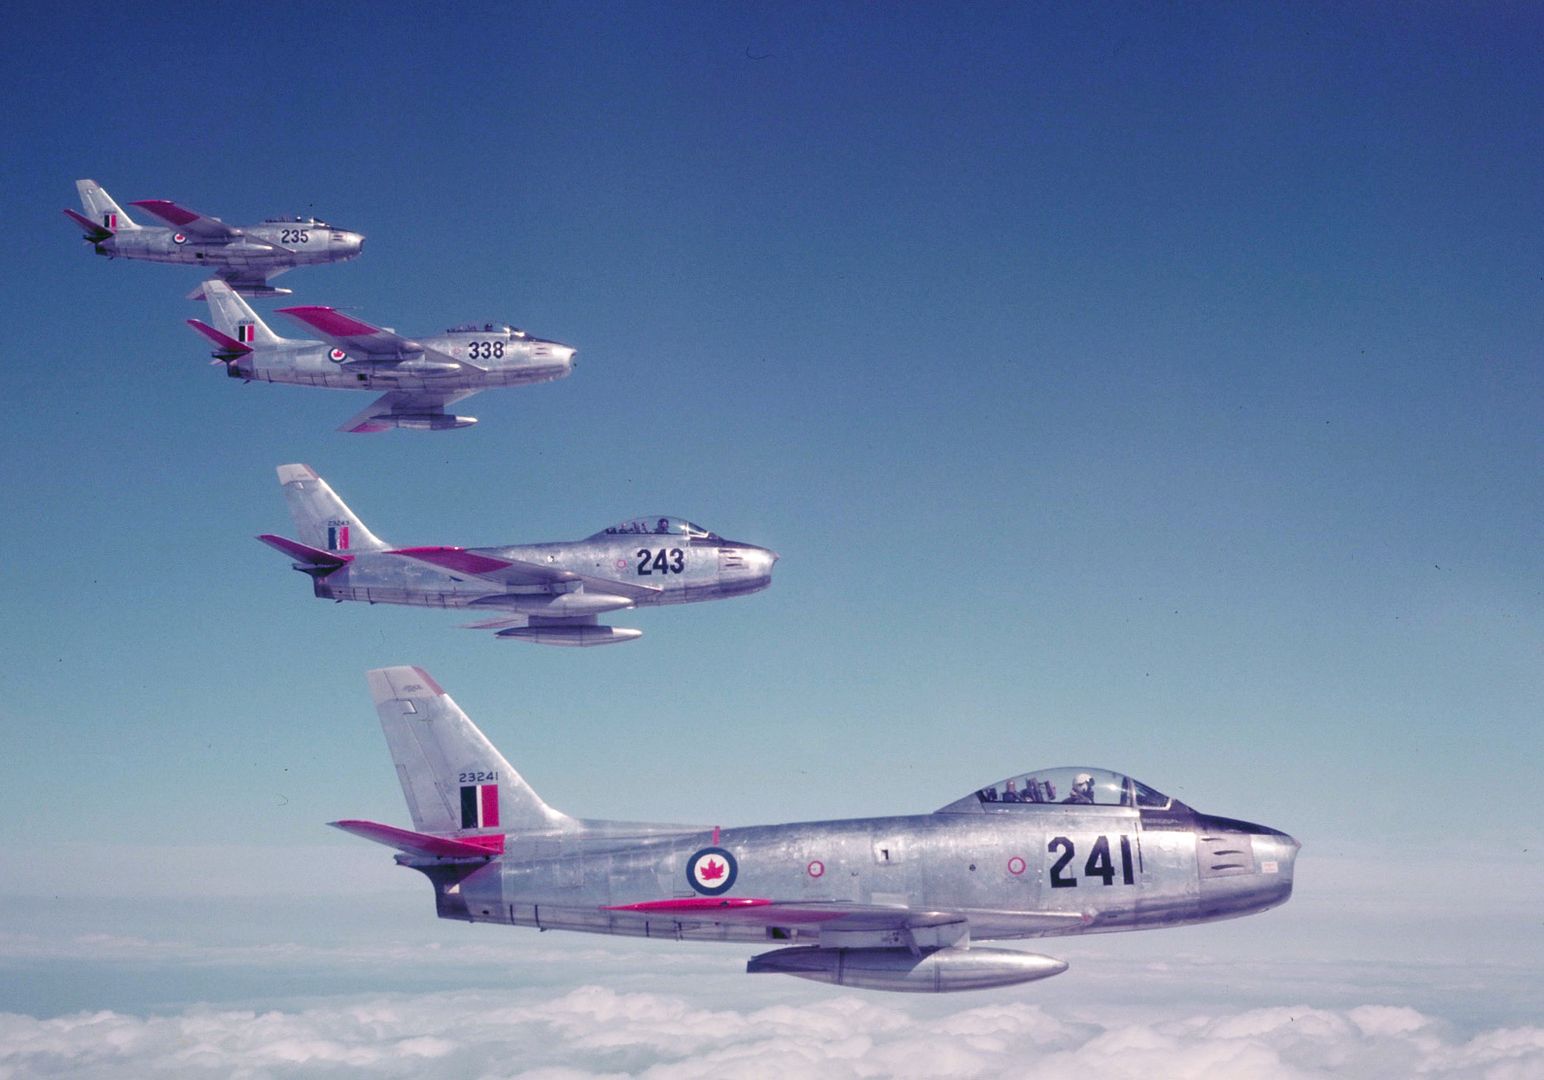 Four Mk V F 86 Sabre Jet Aircraft From RCAF Station Chatham New Brunswick Fly In Formation At The International Air Display In Toronto